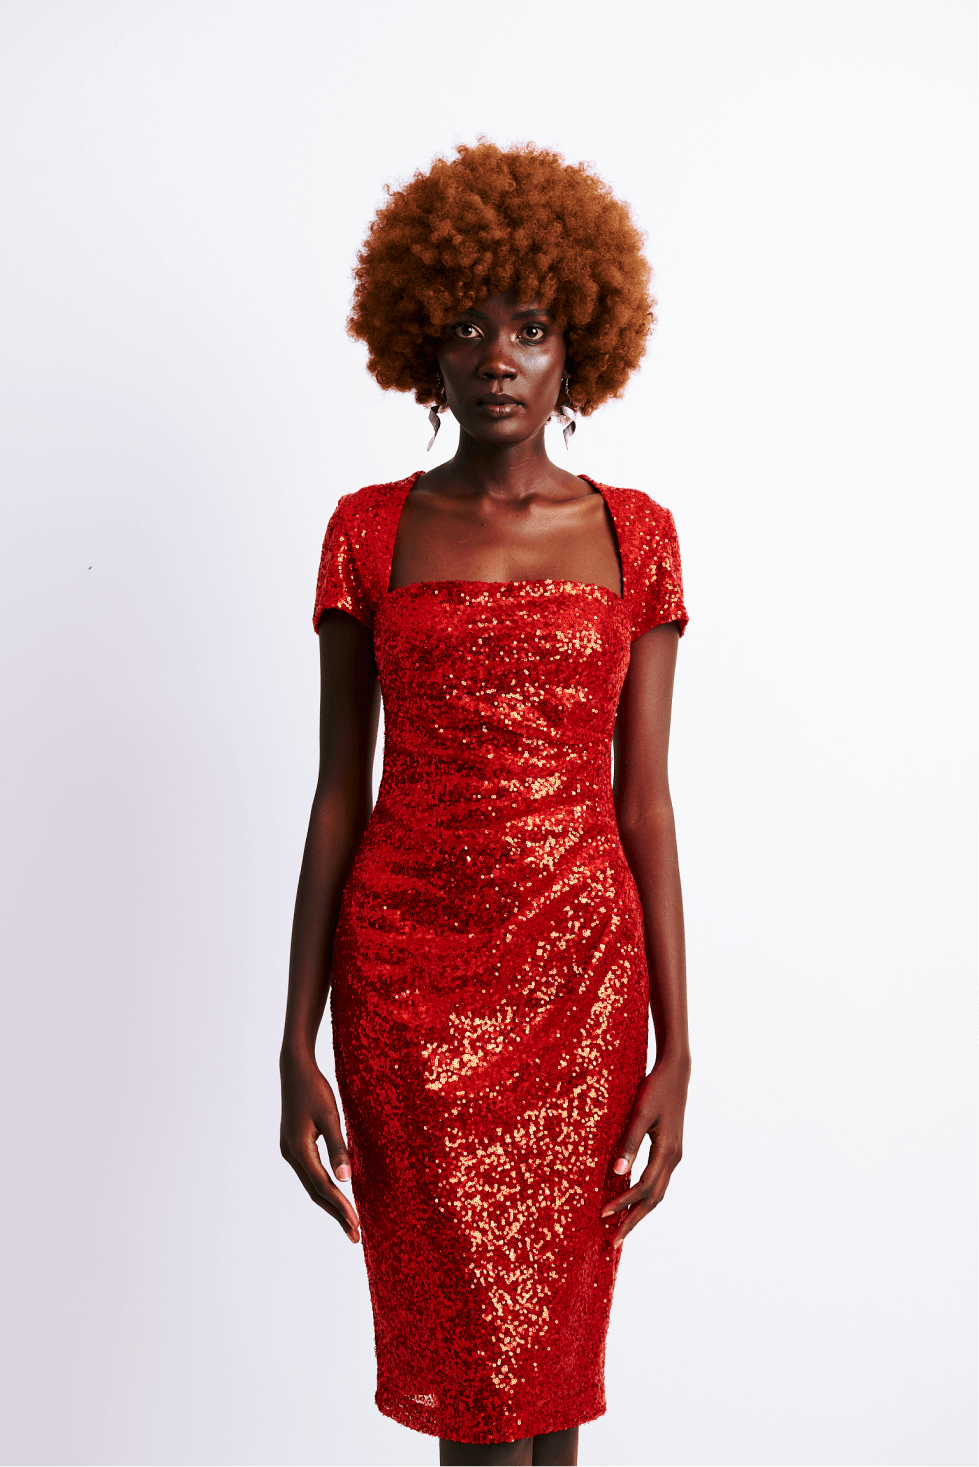 Shop Sequined Cocktail Bodycon Dress by The Fashion Frenzy on Arrai. Discover stylish, affordable clothing, jewelry, handbags and unique handmade pieces from top Kenyan & African fashion brands prioritising sustainability and quality craftsmanship.